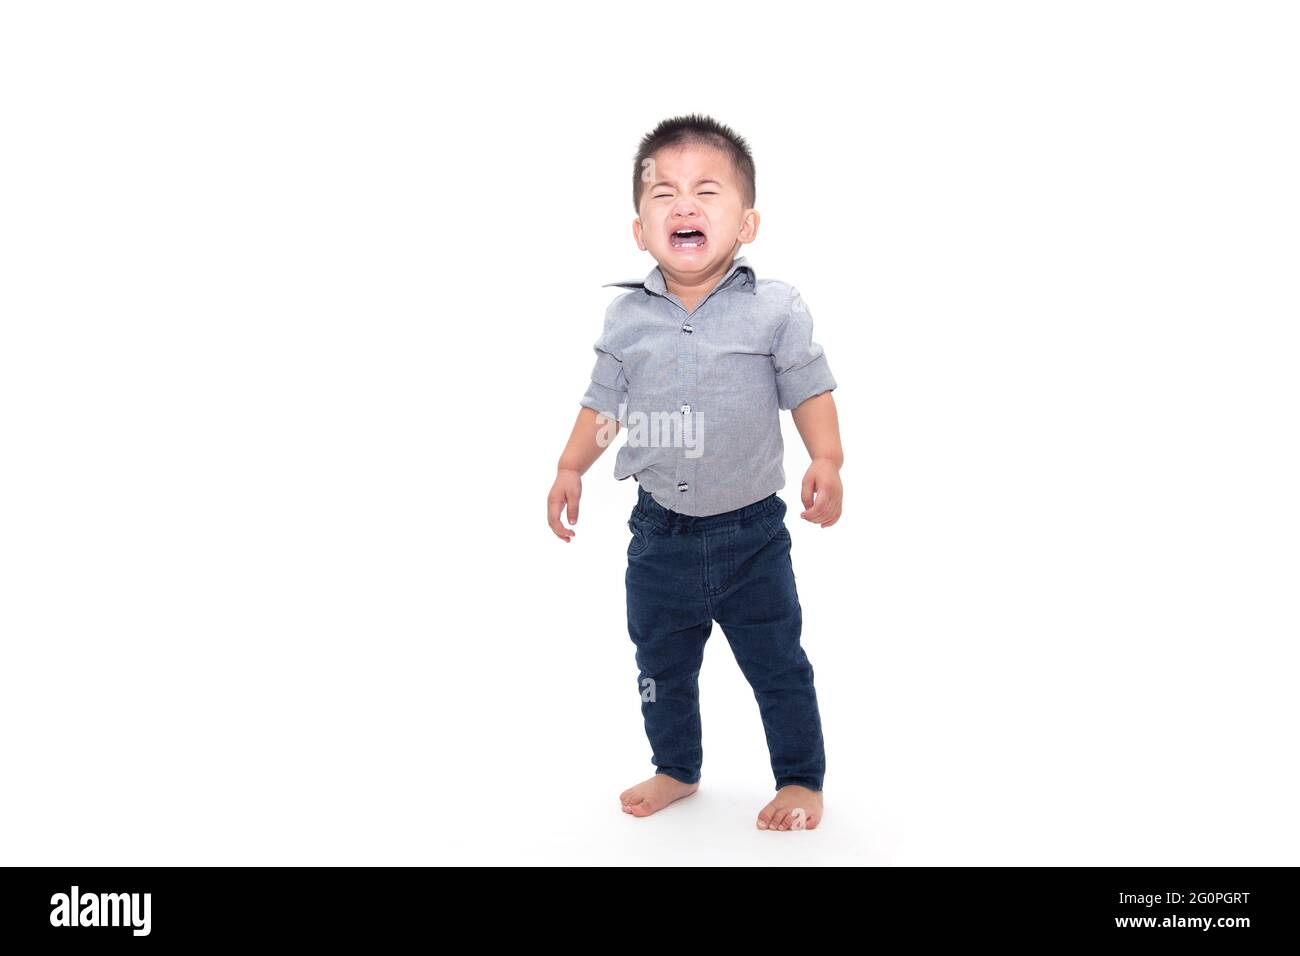 Crying baby boy and wearing business shirt isolated on white background Stock Photo